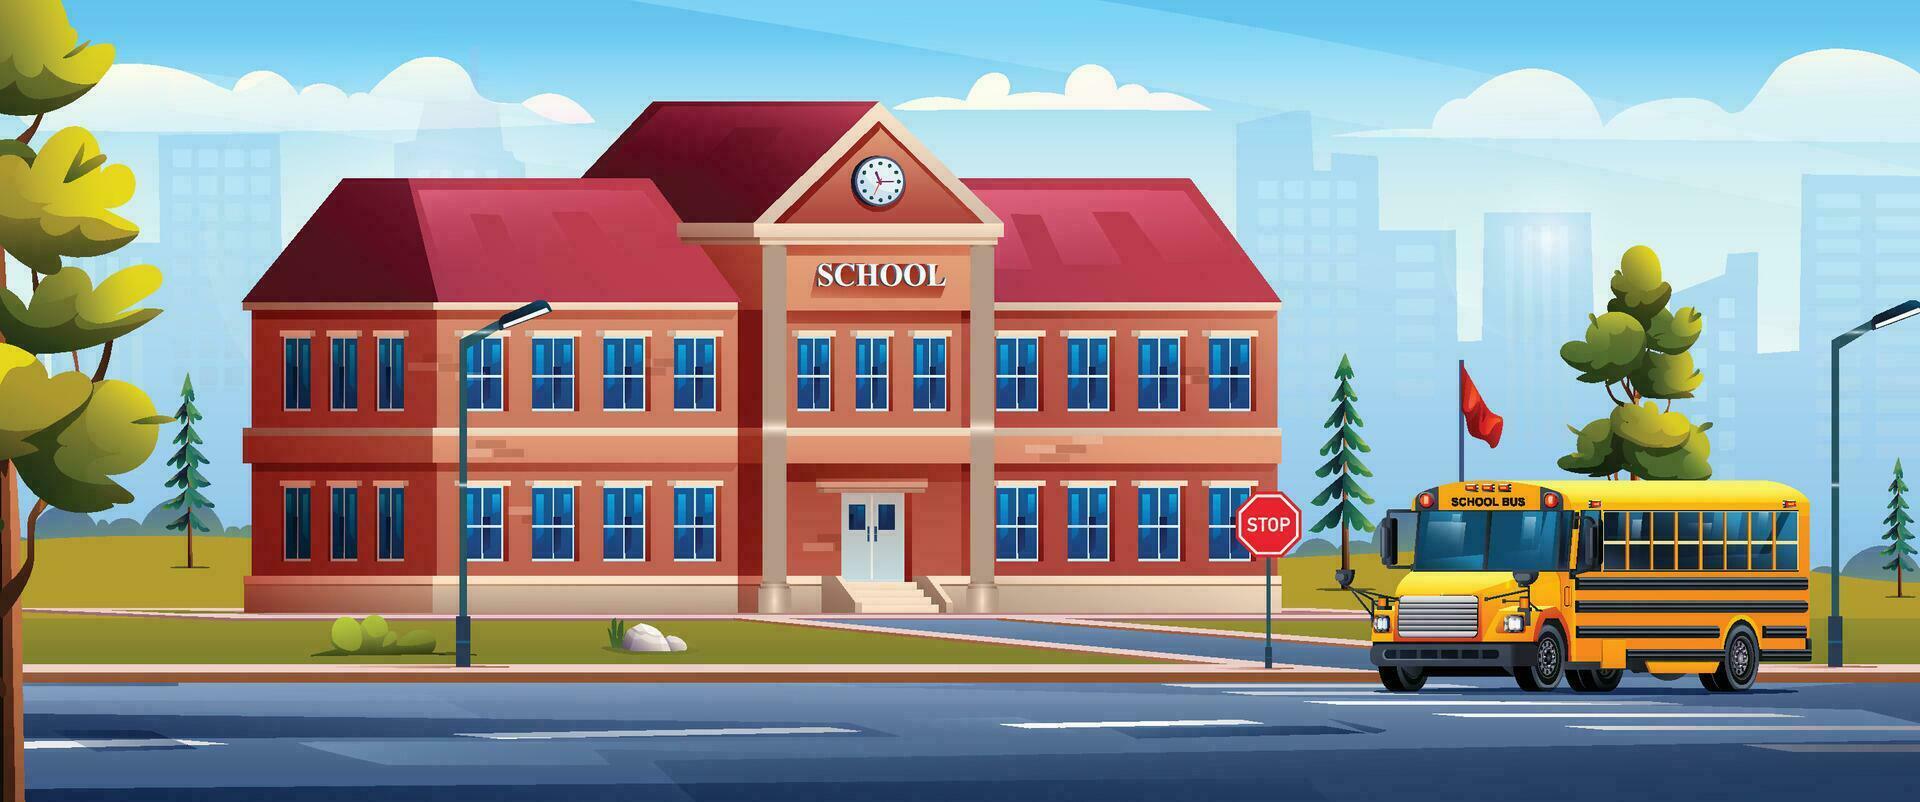 School building with yellow school bus on cityscape background vector cartoon illustration